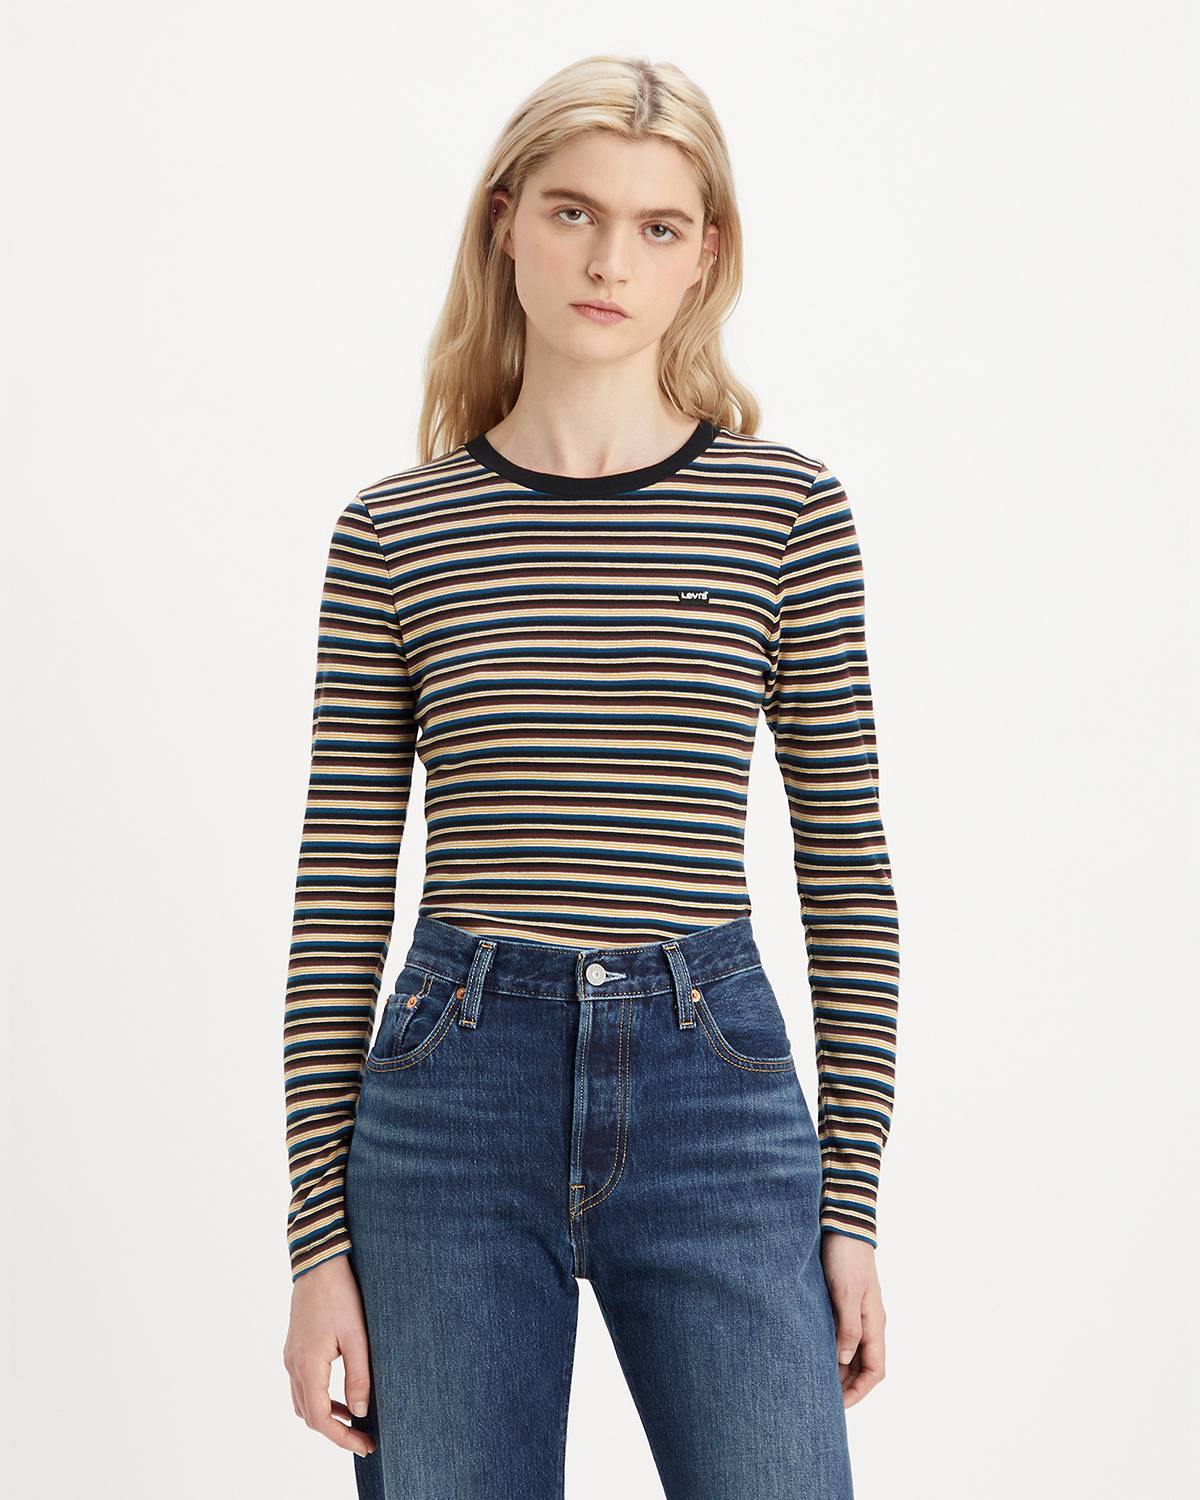 baggrund Precipice Indeholde Women's Tops: Shop Blouses for Women & More | Levi's® US